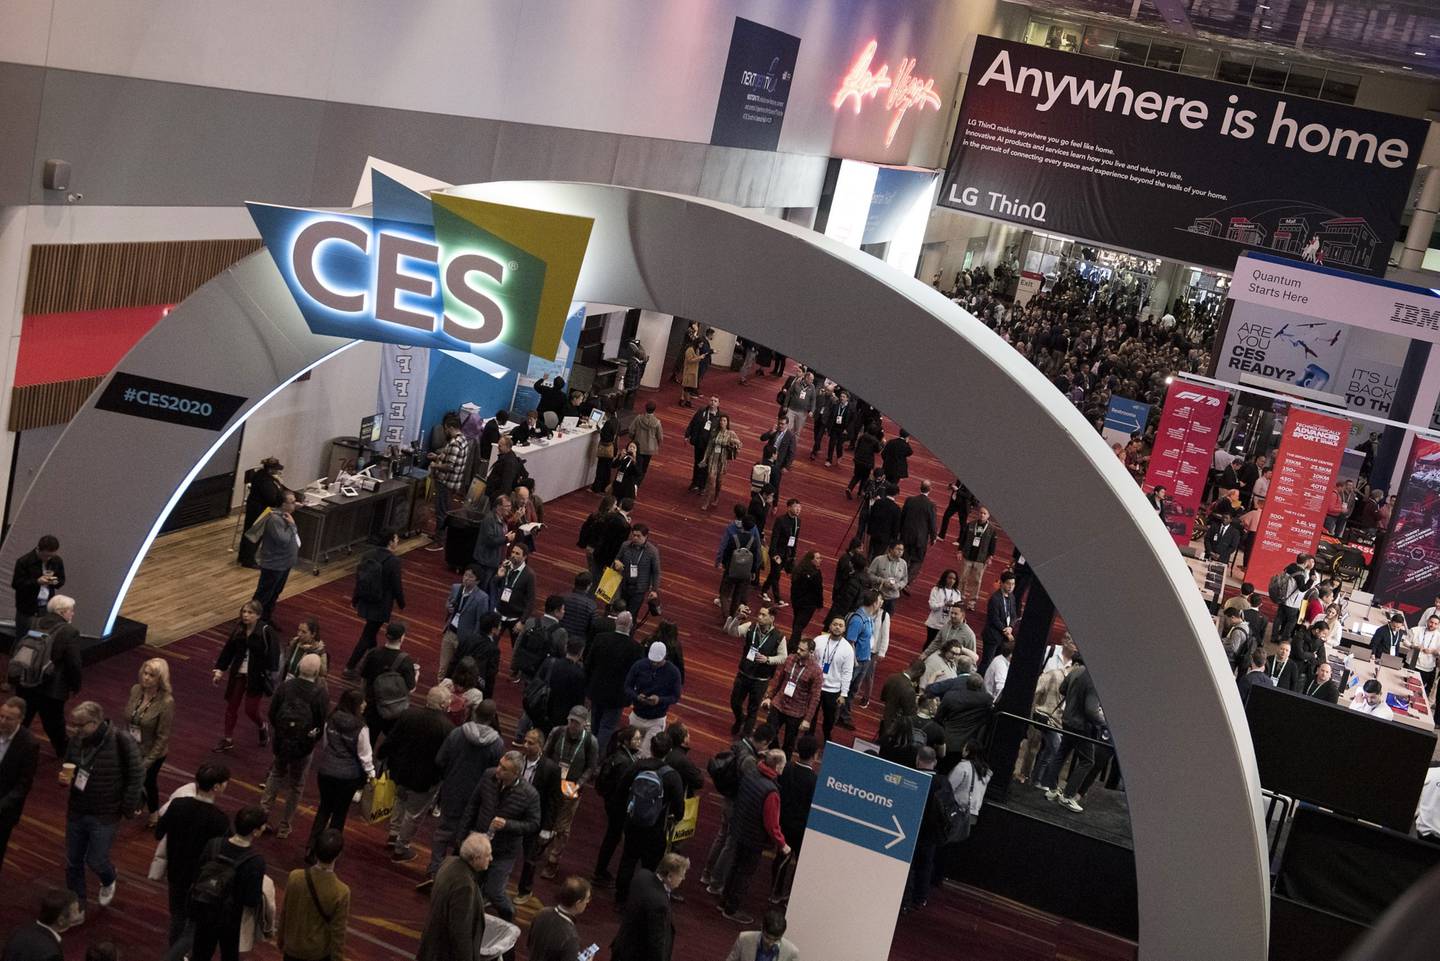 Attendees walk through a hall during CES 2020 in Las Vegas, in 2020.